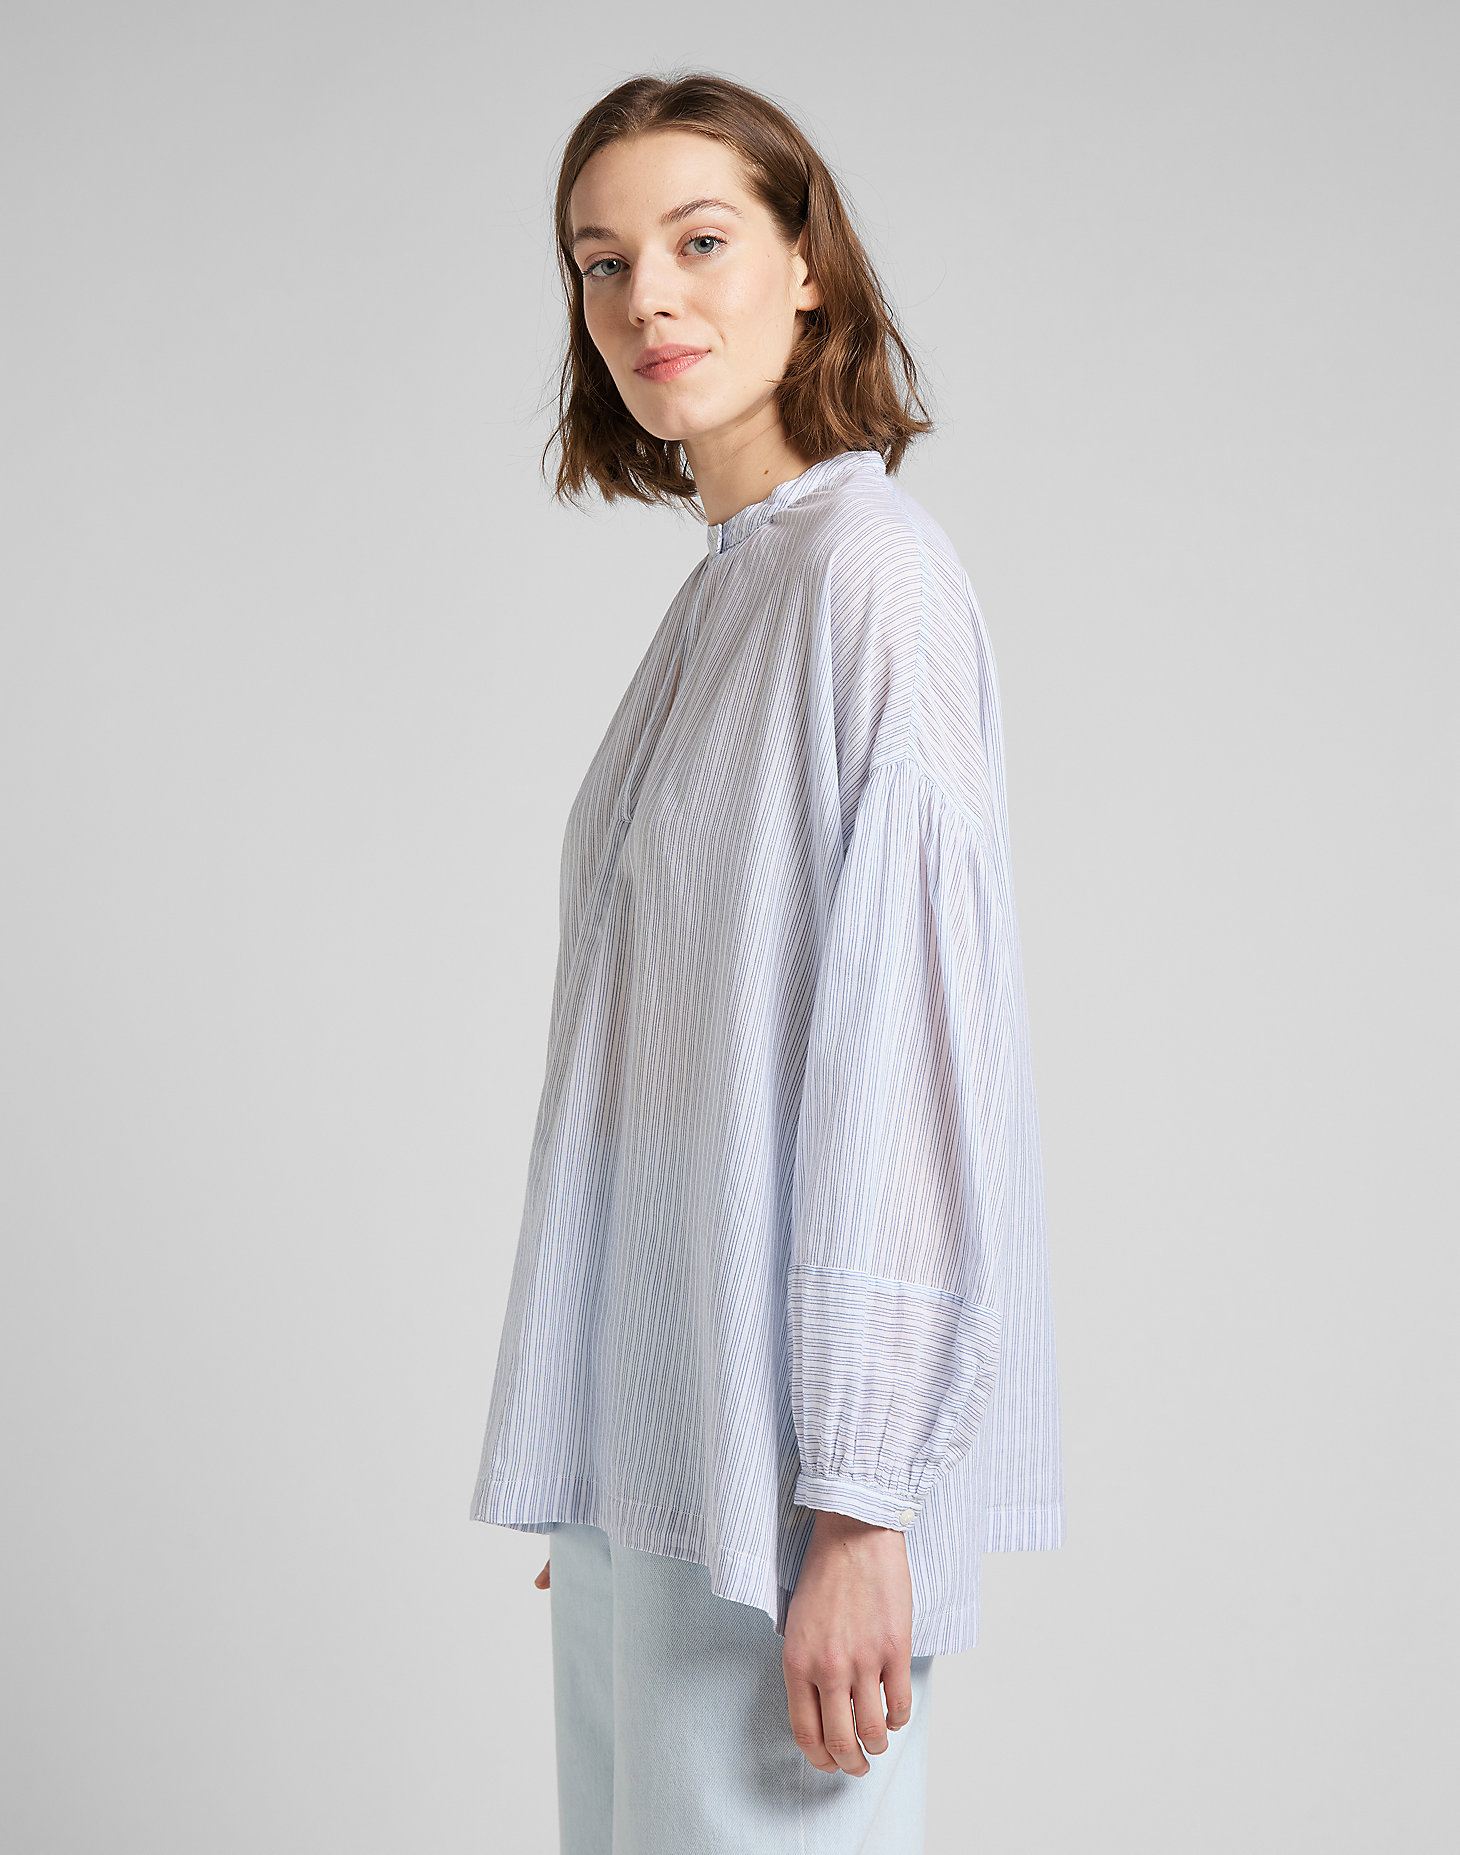 Relaxed Blouse in Bright White alternative view 3